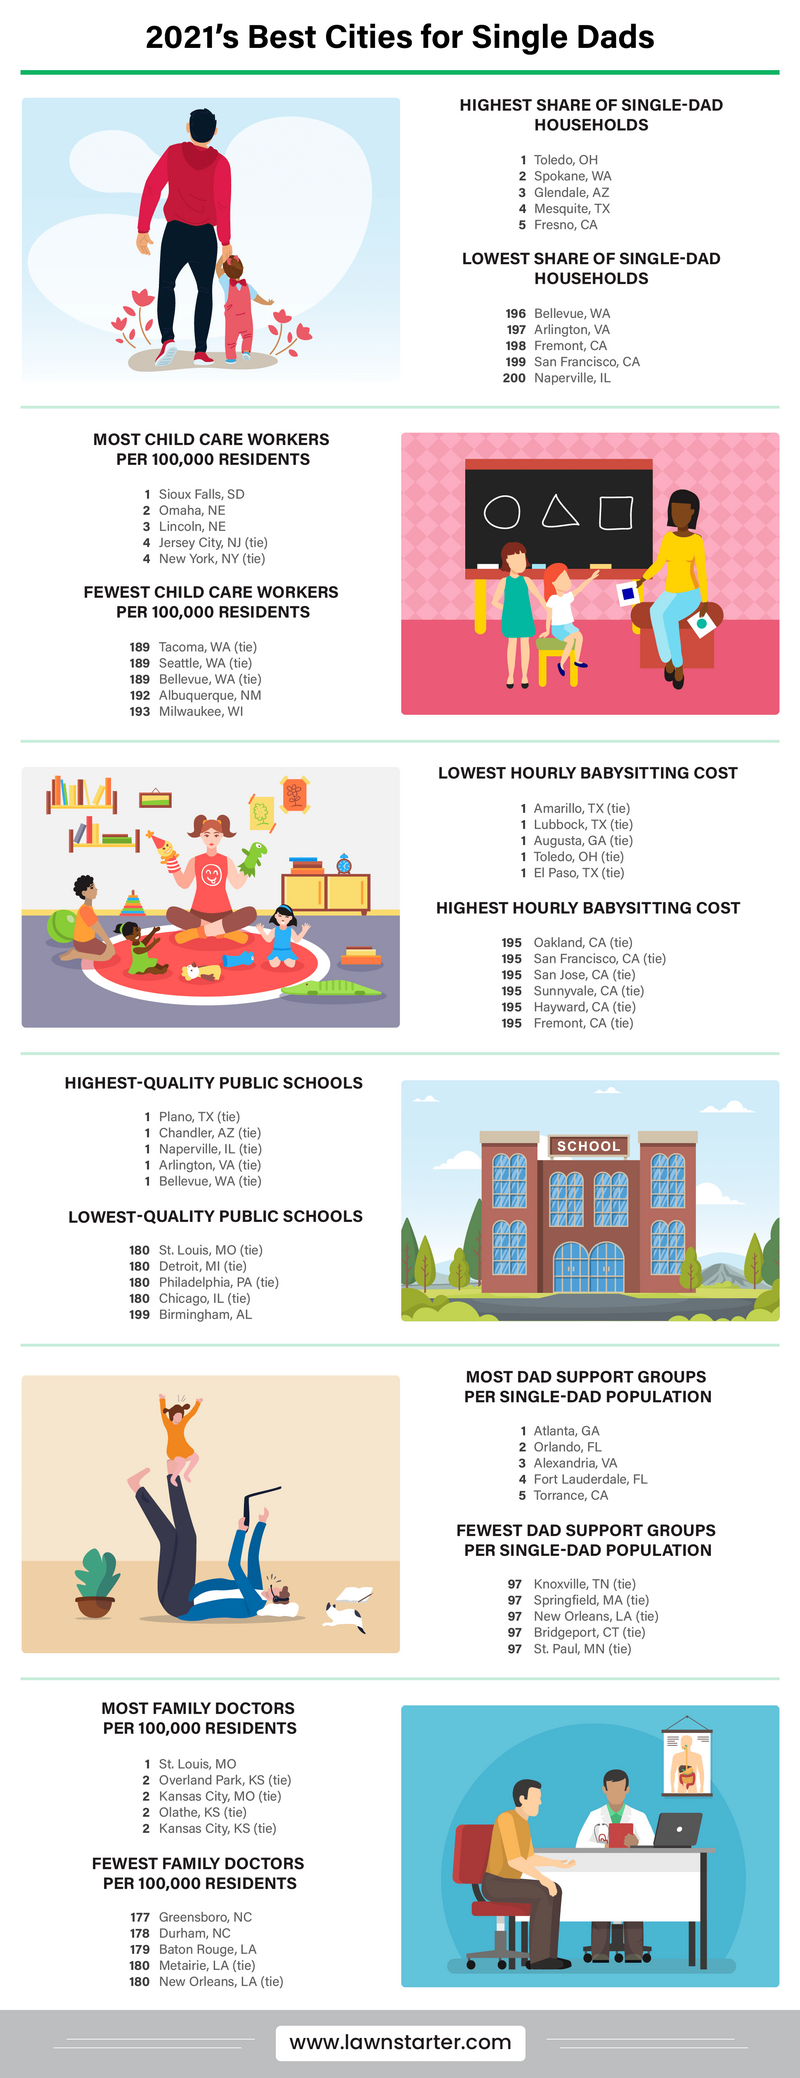 infographic depicting best and worst cities for single dads